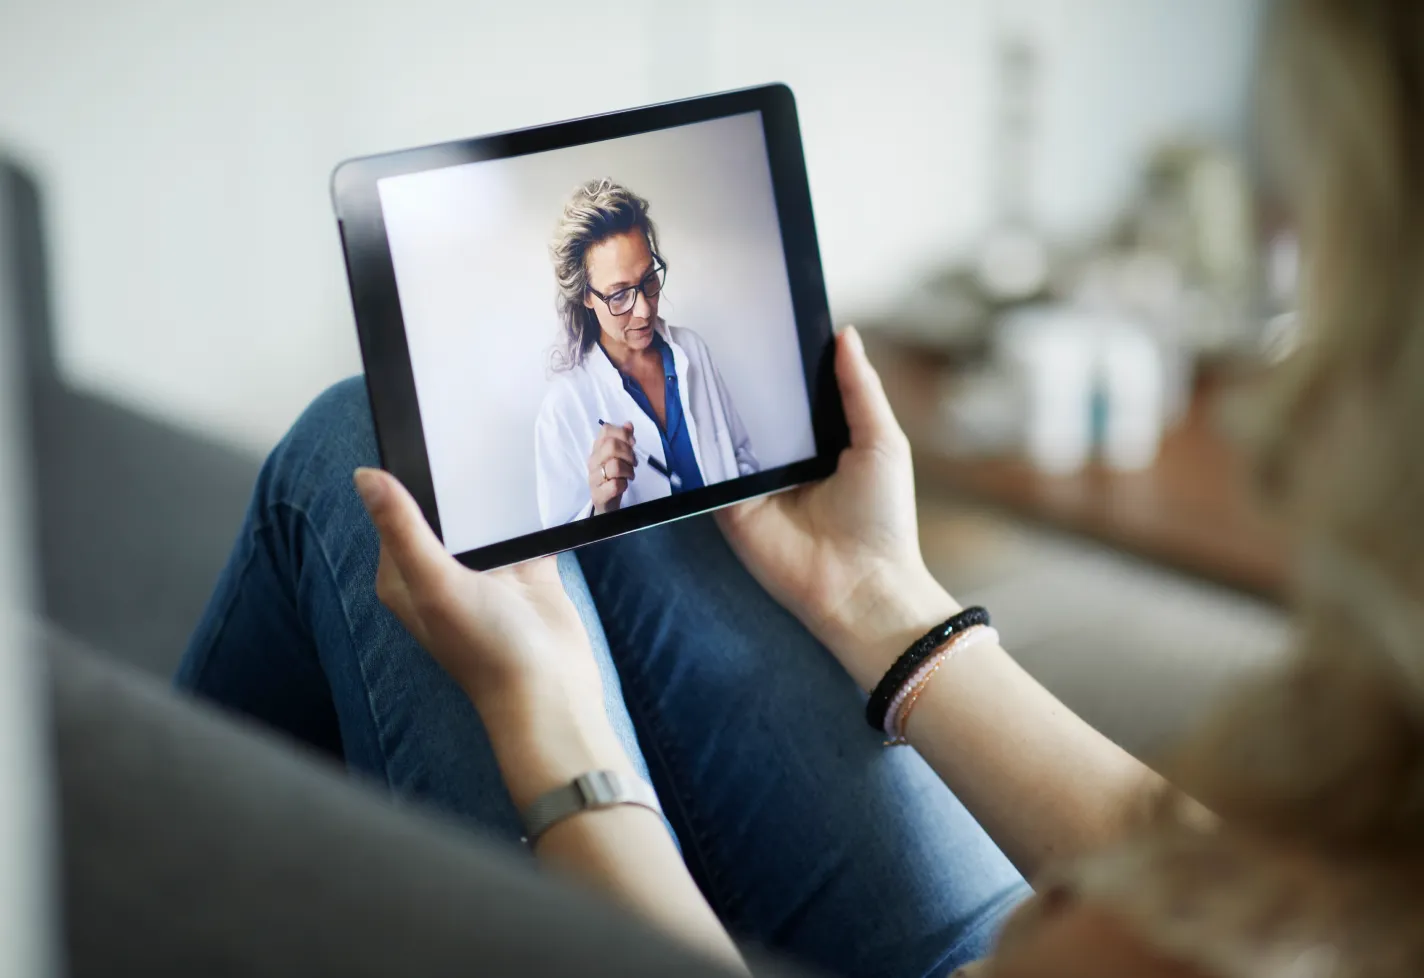 A patient is holding an iPad in their lap with their doctor on the screen during a virtual visit.